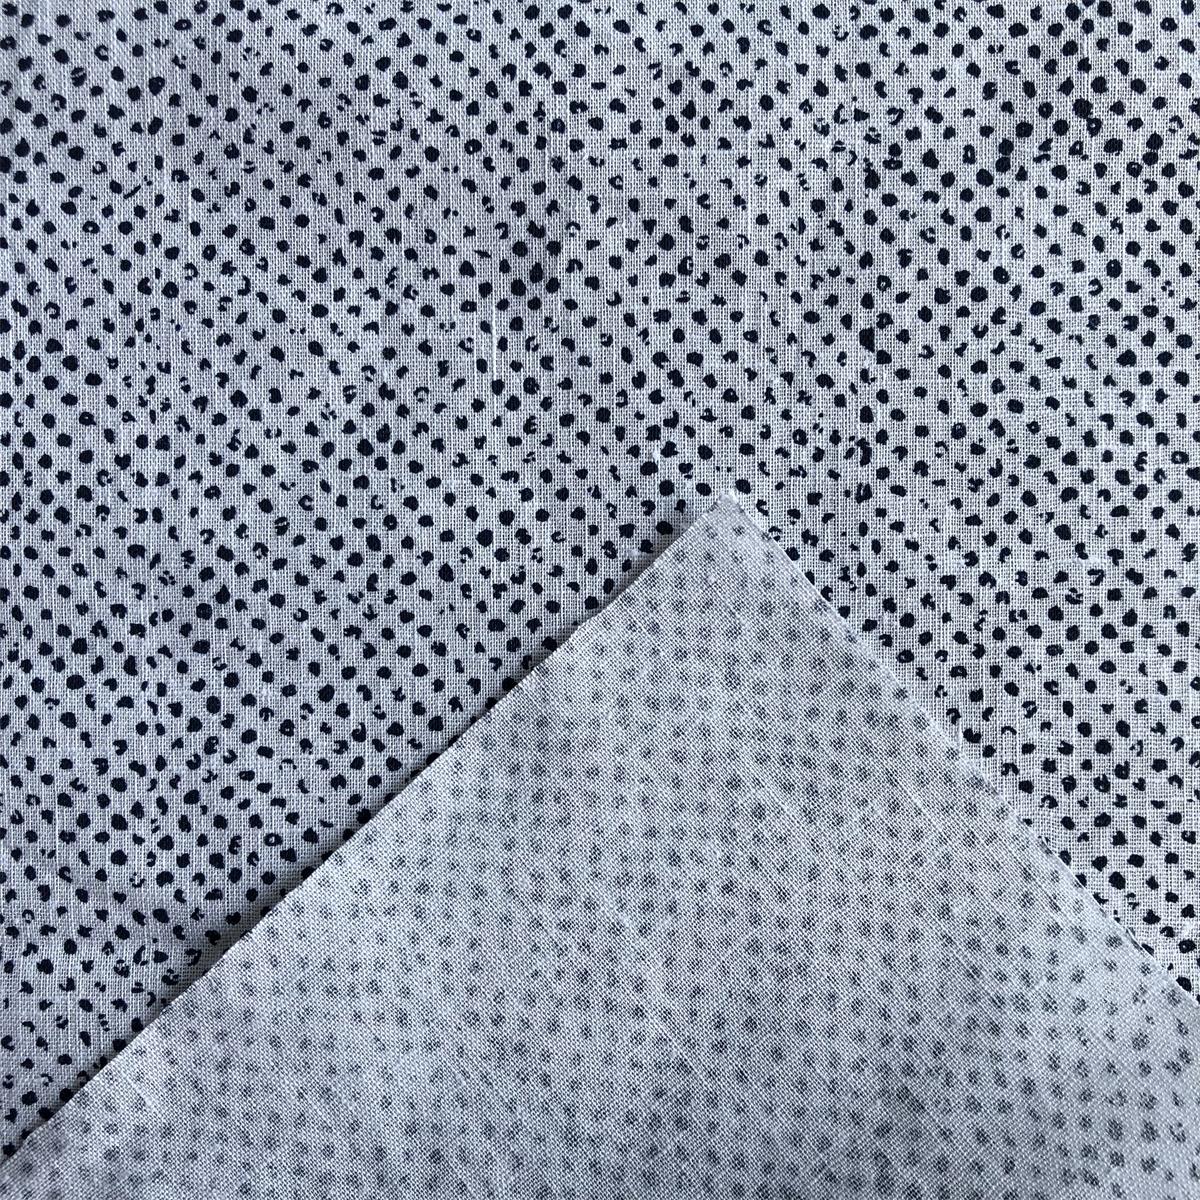 Fashion design Linen Cotton Fabric by blended yarn woven for men's casual shirts 55% linen 45% cotton printed shirts woven fabric